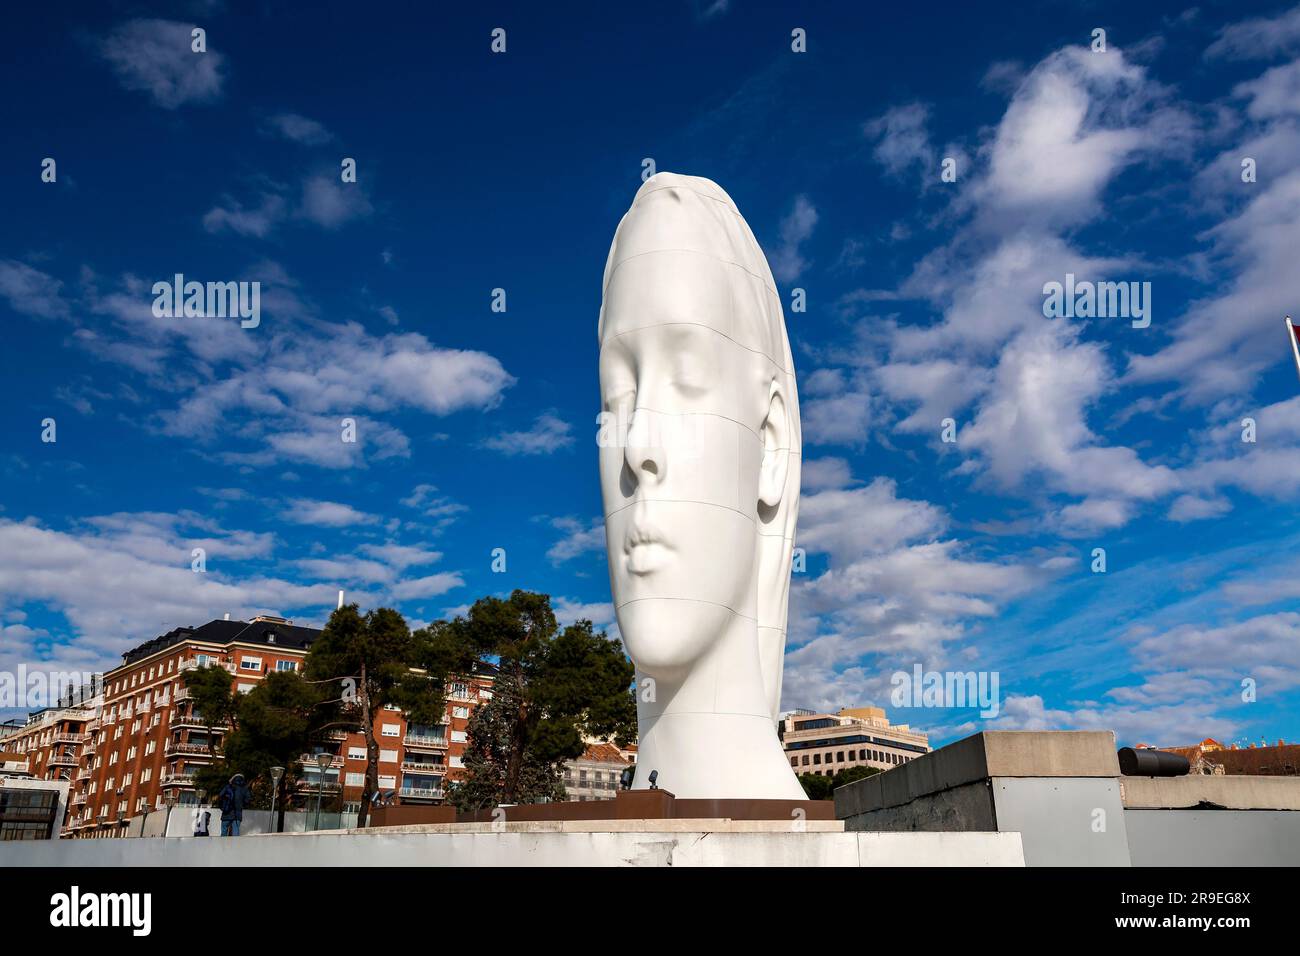 Madrid, Spain - FEB 19, 2022: Modern sculpture titled Julia by Jaume Plensa Sune located at the Plaza de Colon in Madrid, Spain. Stock Photo